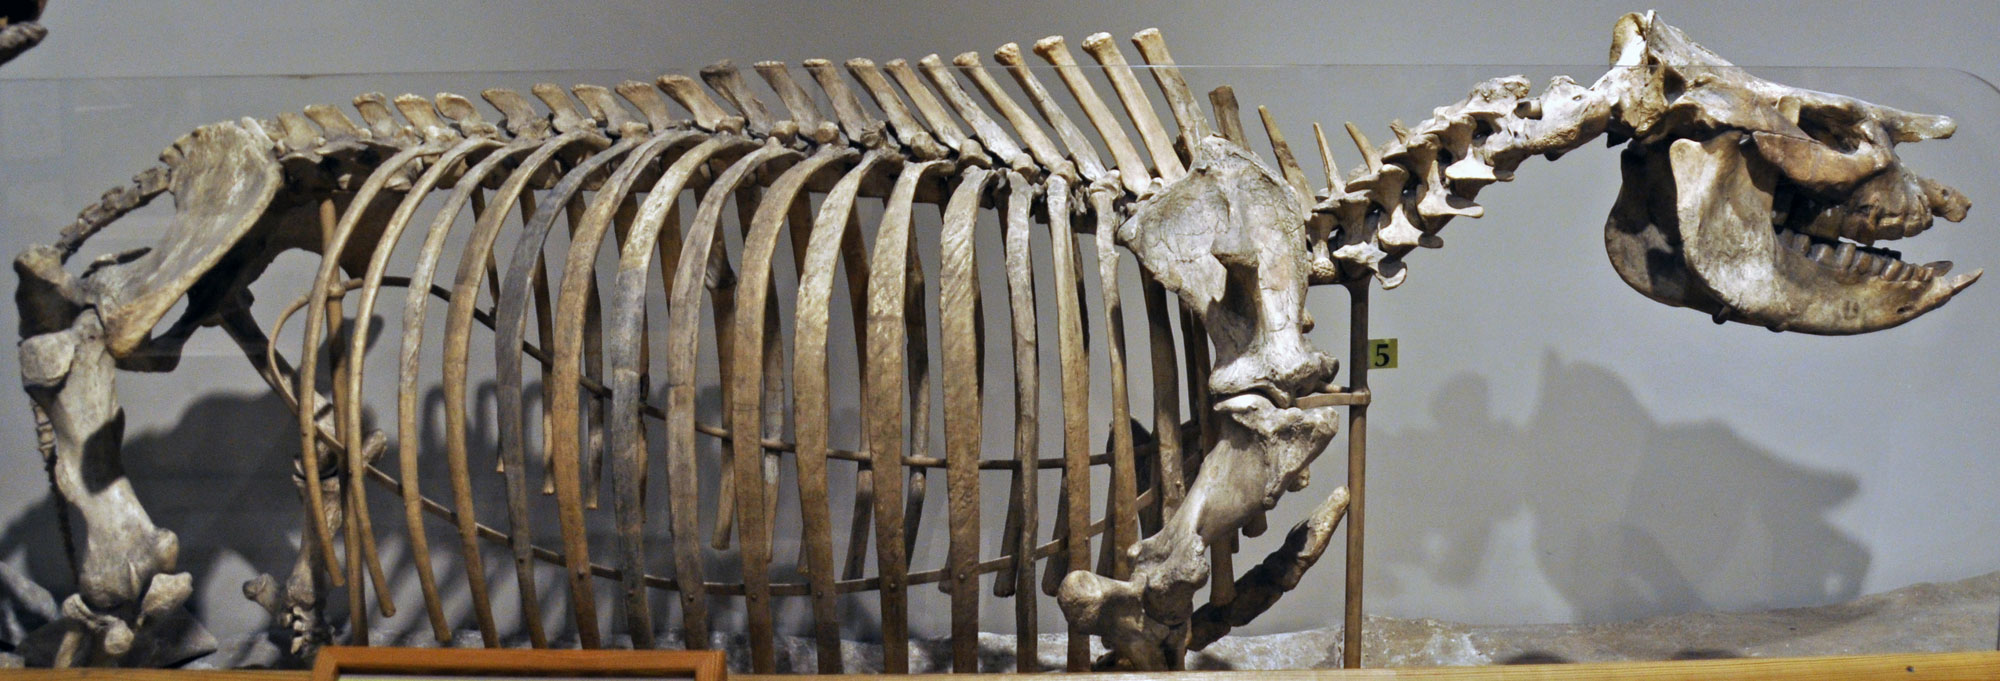 Photo of a skeleton of an extinct North American rhino from the Miocene of Kansas on display in a museum.